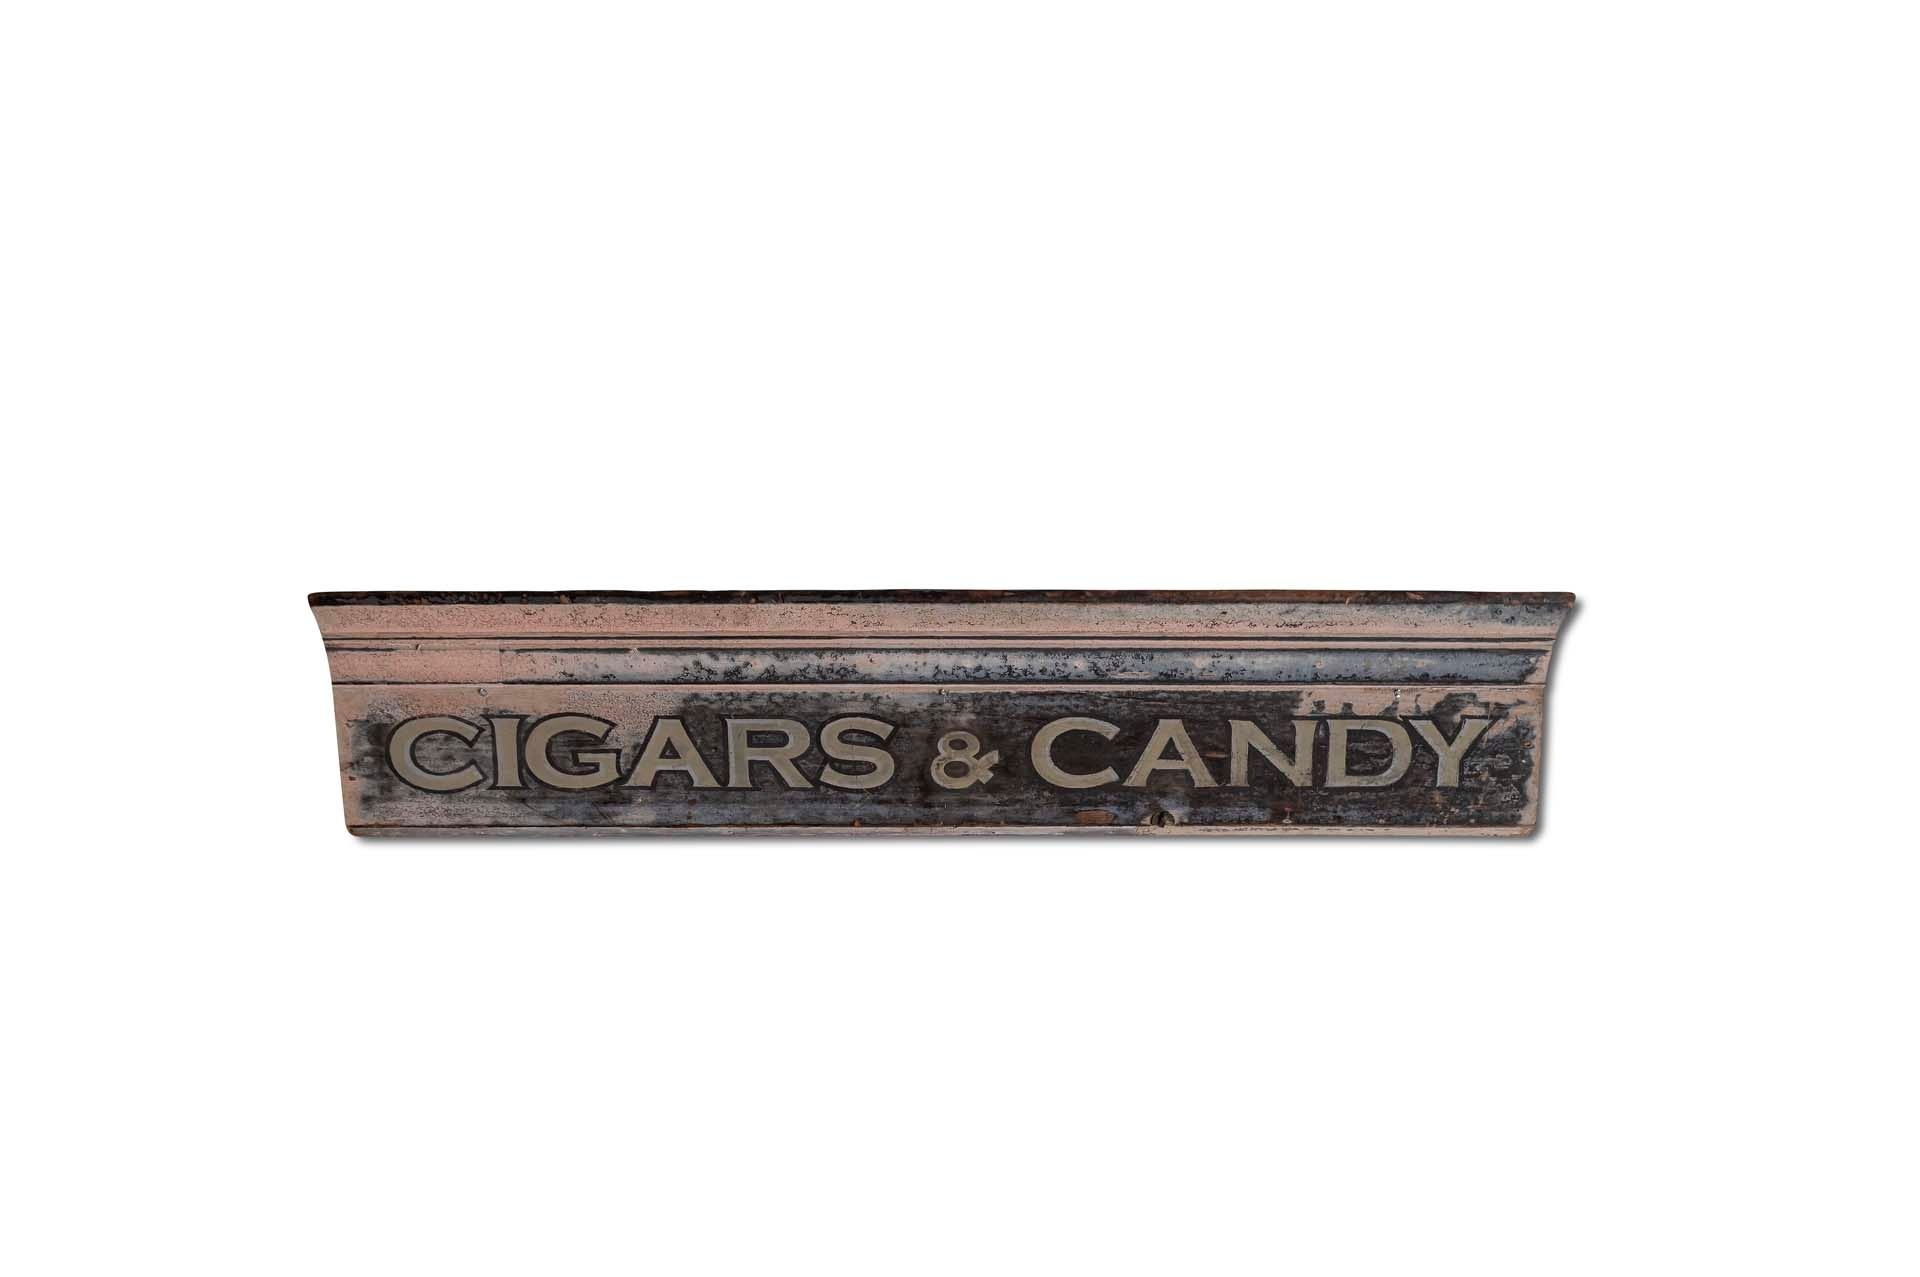 For Sale 'Cigars & Candy' Wood Eave Sign